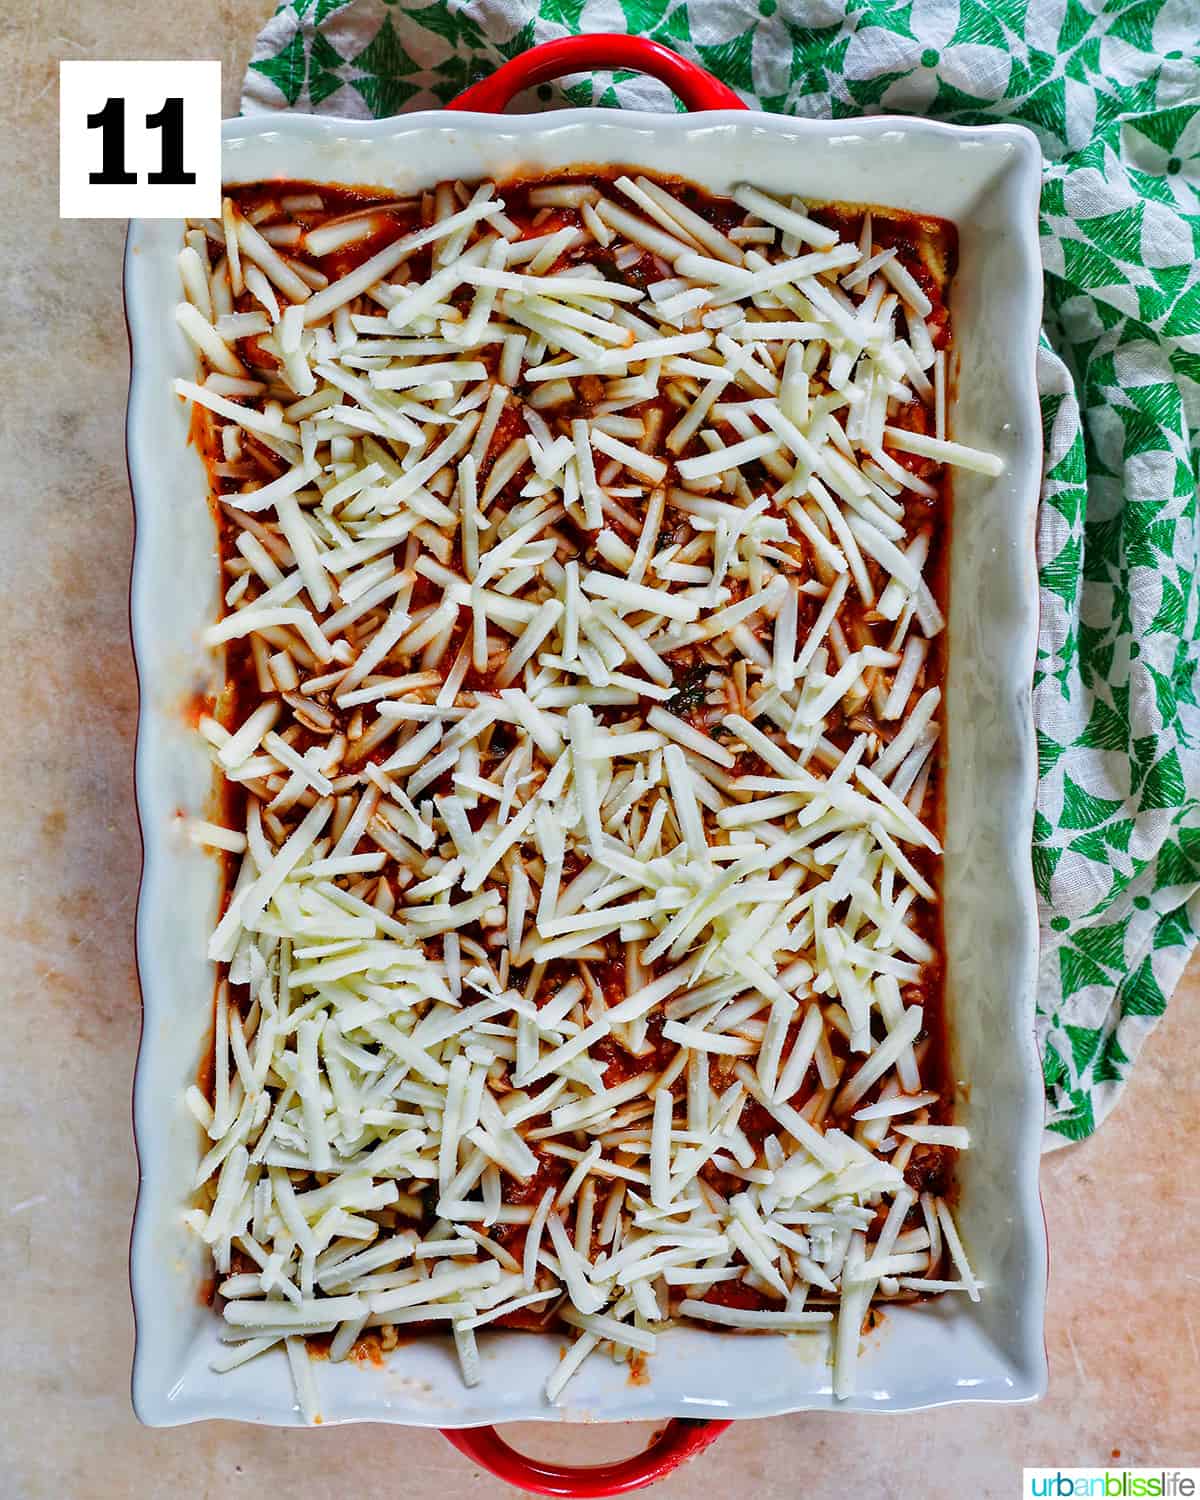 shredded dairy free mozzarella cheese added to the top layer of dairy free lasagna in a baking dish with red handles.